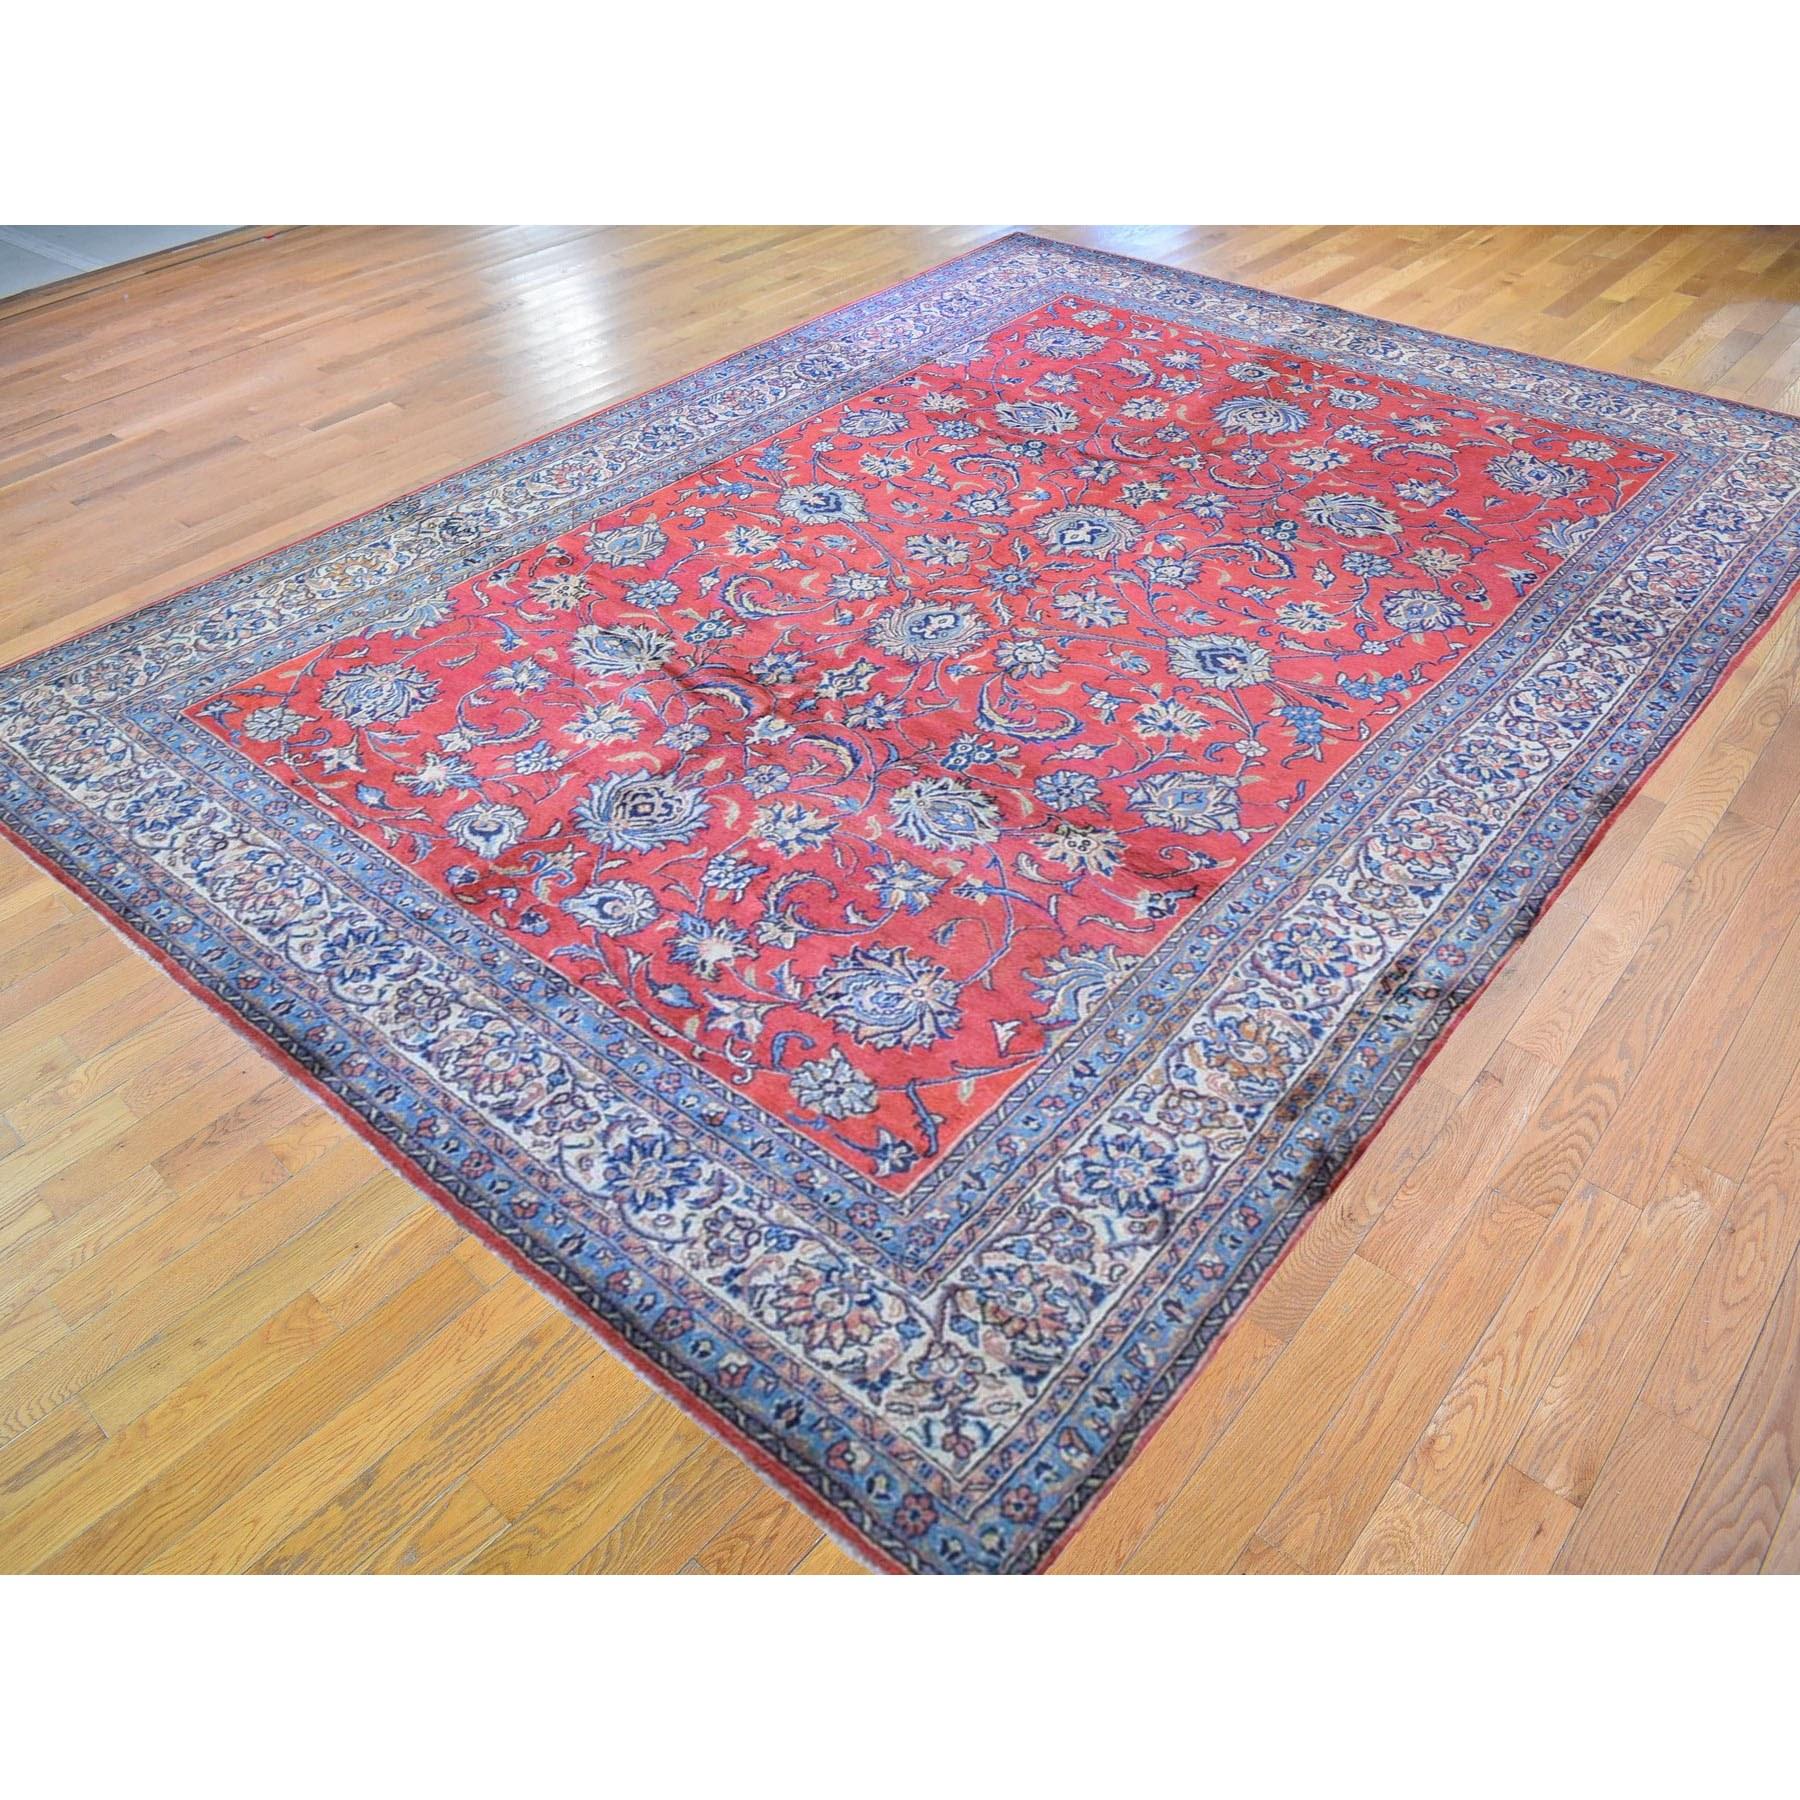 Medieval Vintage Persian Mahal Excellent Condition Persimmon Color Wool Hand Knotted Rug For Sale